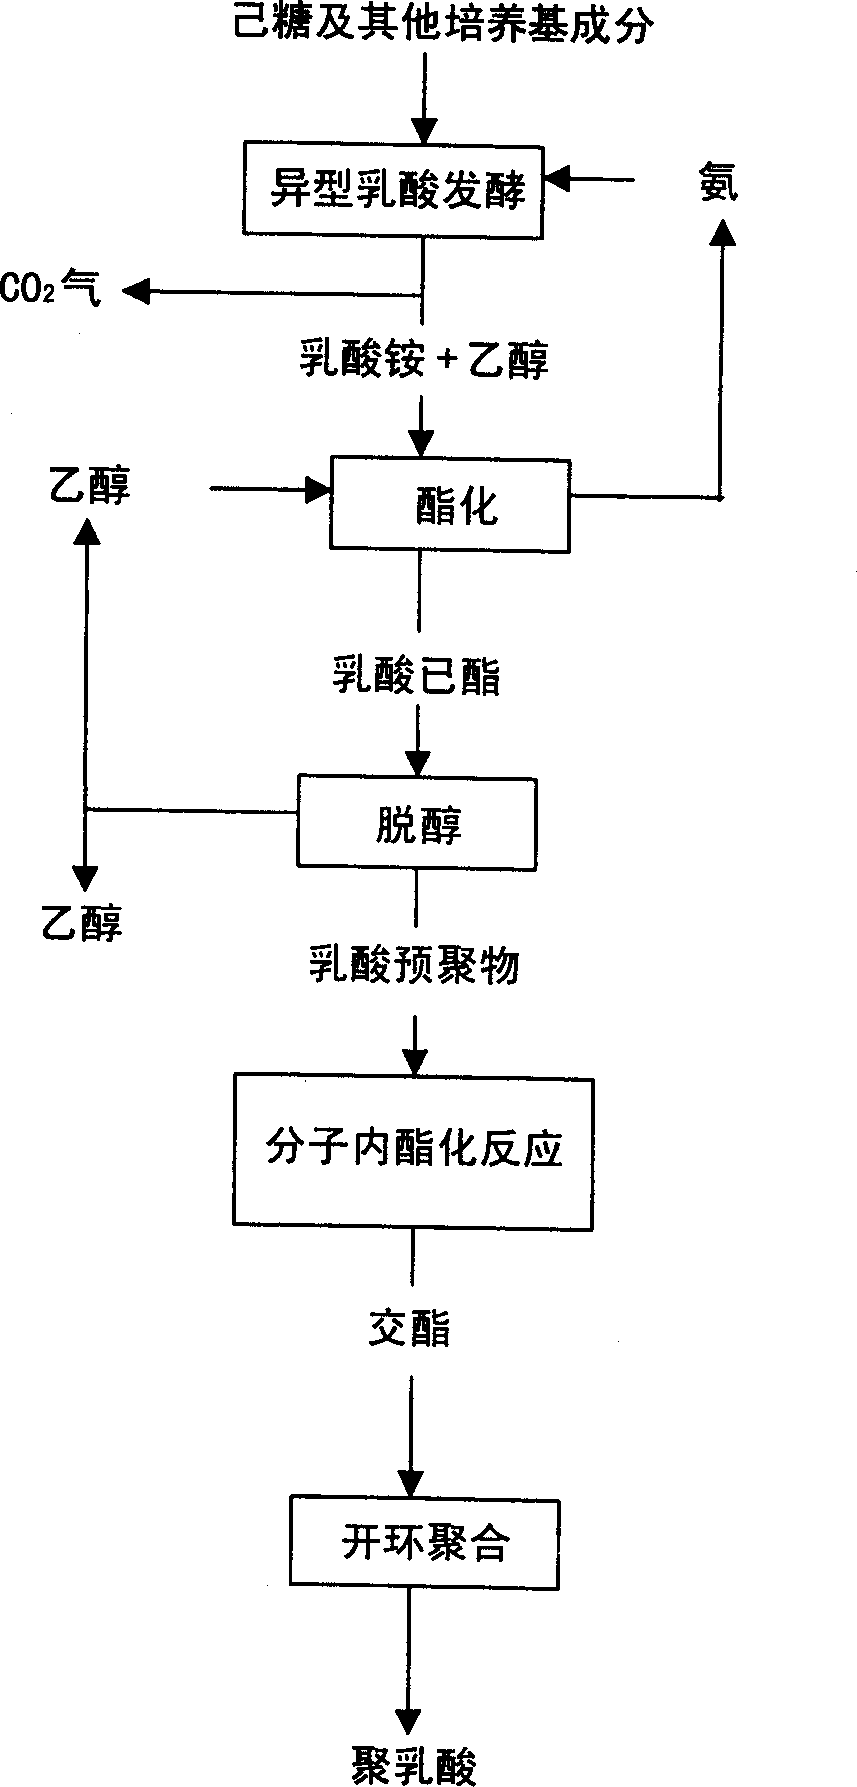 Mfg. Method of cyclic diester using fermented lactic acid as raw material and method for mfg. polylactic acid